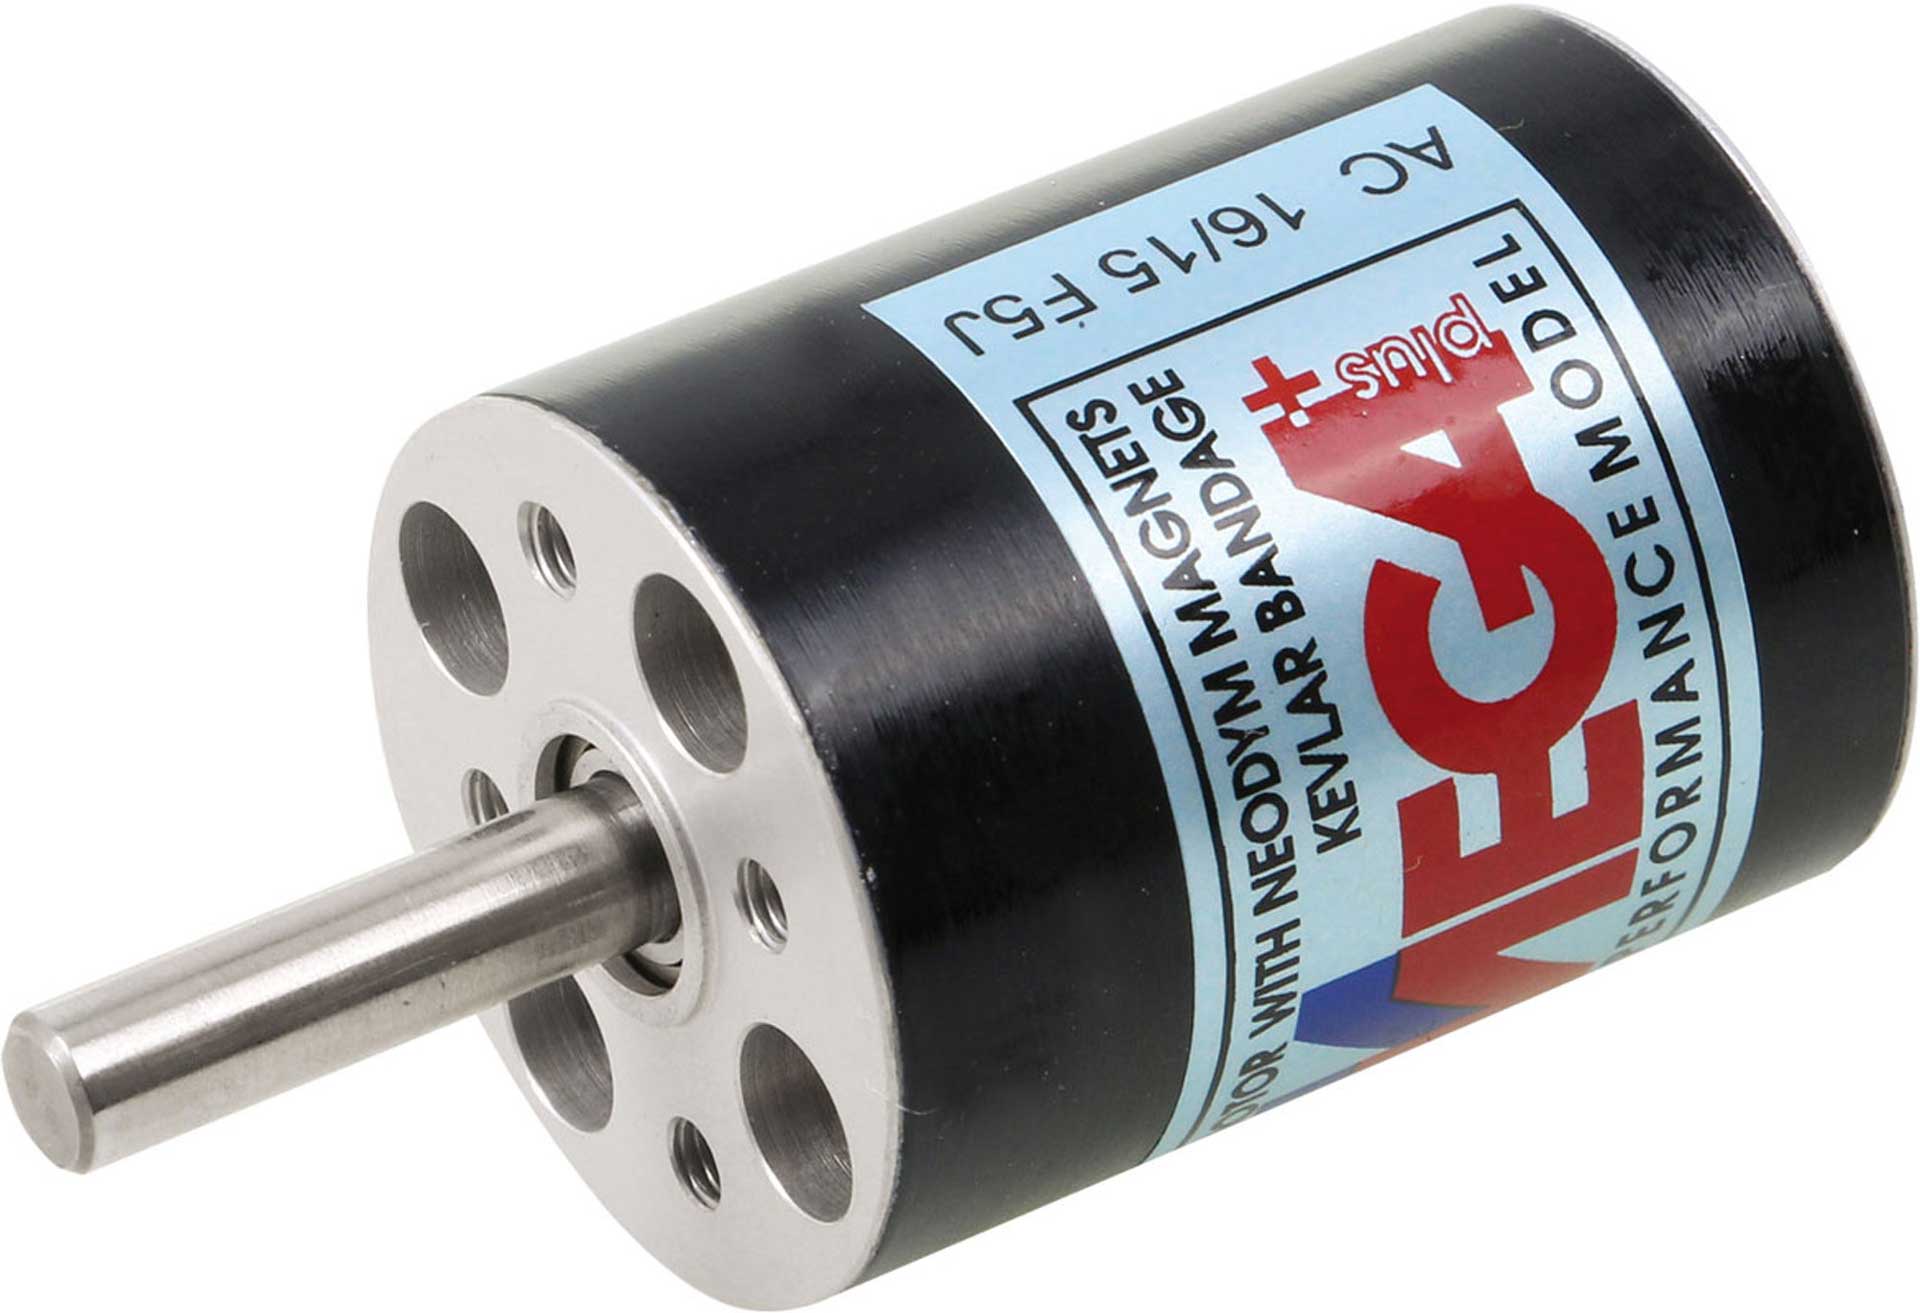 MEGA AC-N 16/15/4 CE BRUSHLESS MOTOR ESPECIALLY SUITABLE FOR F5J